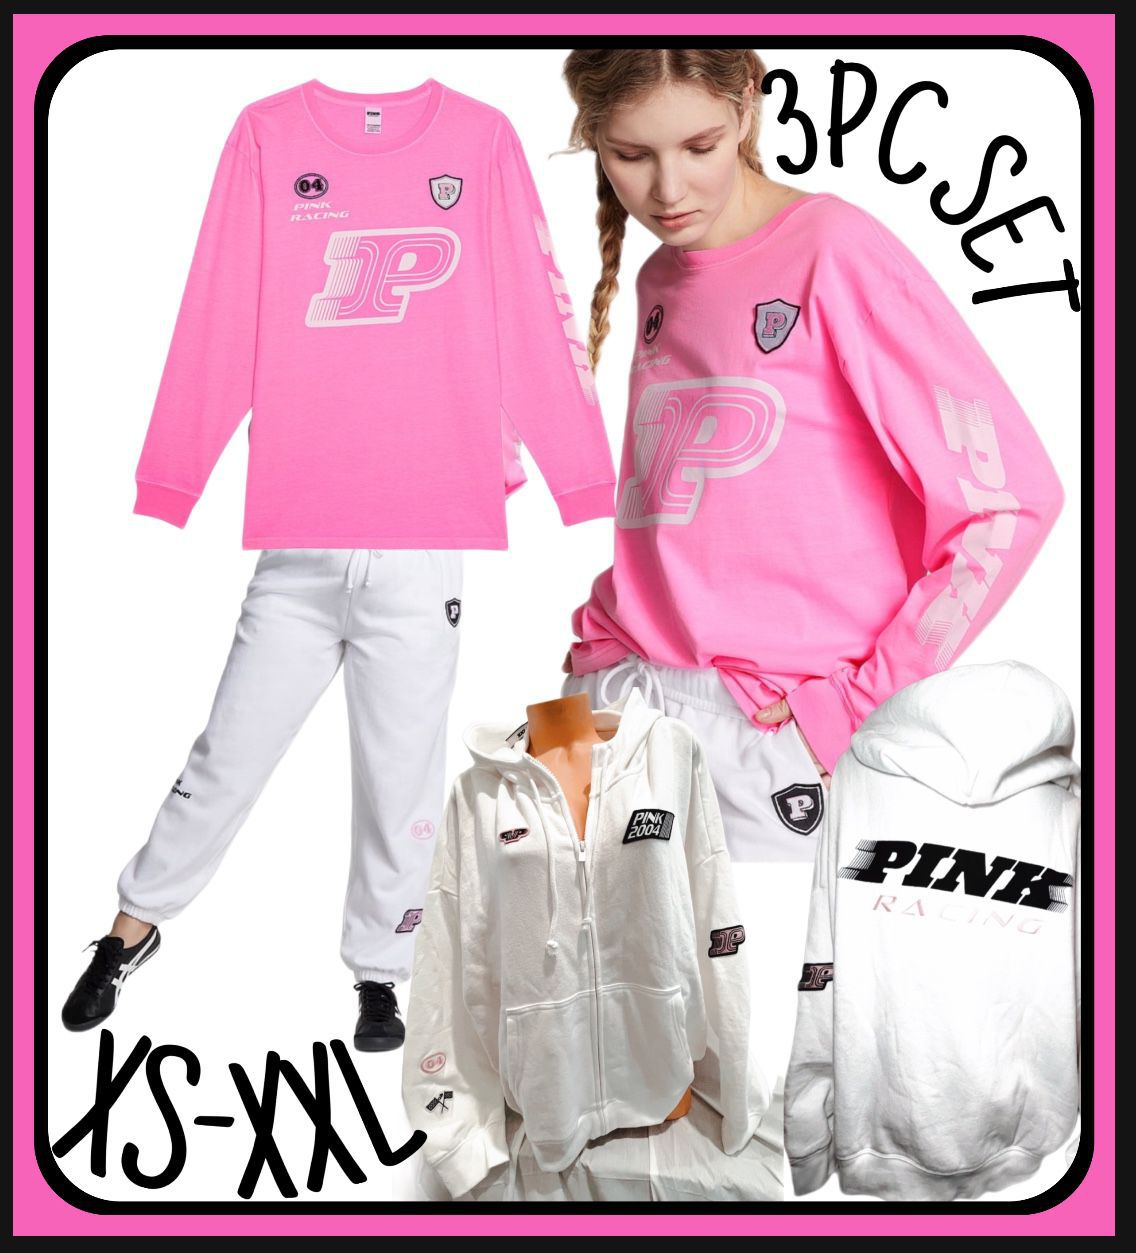 NEW WITH TAGS VICTORIAS SECRET PINK 3PC SET. ZIP HOODIE, PANTS & TEE SHIRT RACING THEME LIMITED ED XS S M L XL XXL